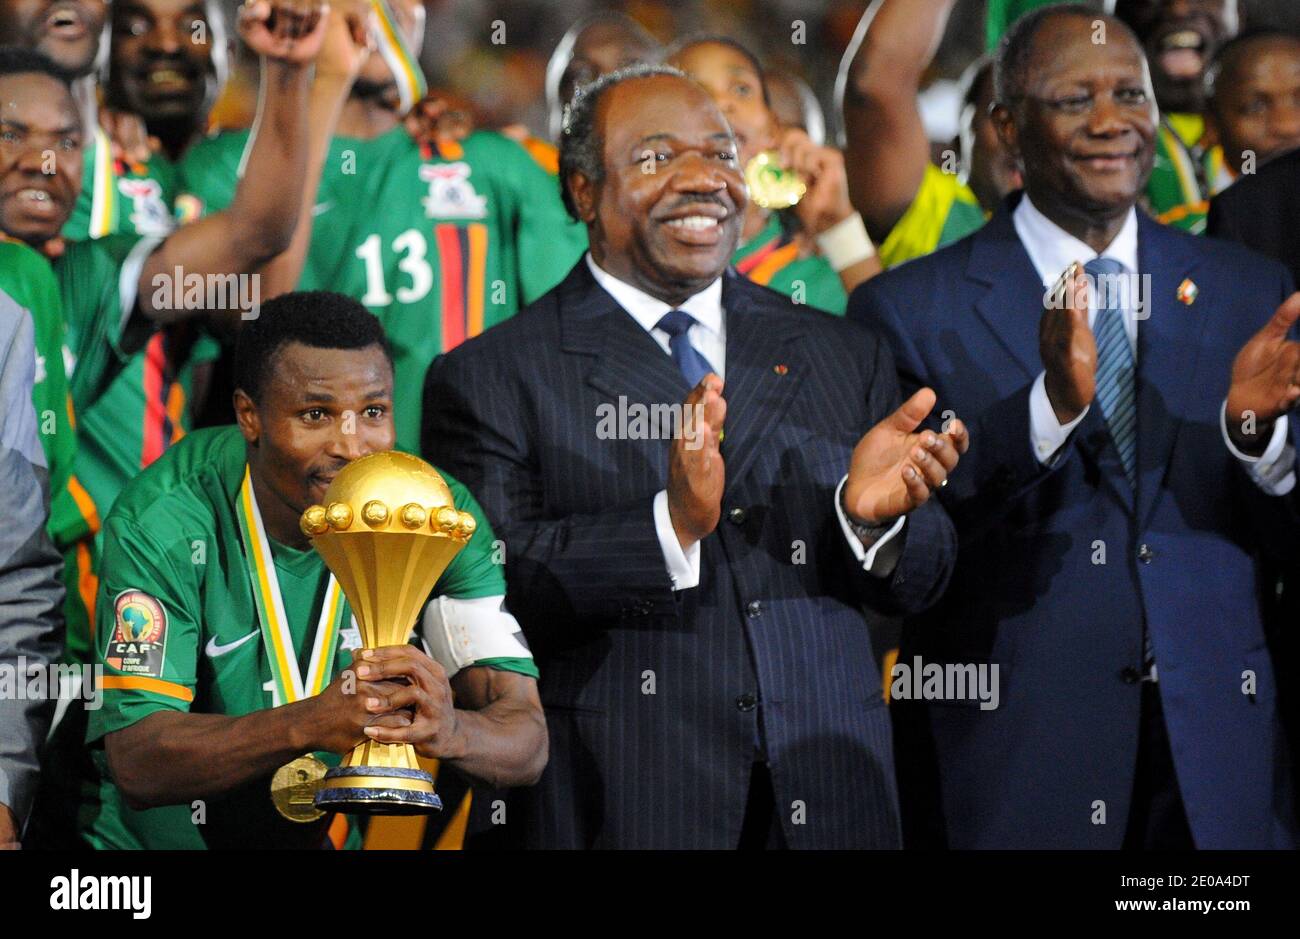 Zambia's national football team captain Christopher Katonga (Bottom L) receives the African Cup of Nations trophy from Gabon President Ali Bongo Ondima (R) and Guinea Equatorial President Theodoro Obiang Nguema (2nd R) during an awards ceremony at the end of the 2012 African Cup of Nations Soccer Match, Final, Zambia Vs Ivory Coast in Libreville, Gabon on February 12, 2012. Photo by ABACAPRESS.COM Stock Photo